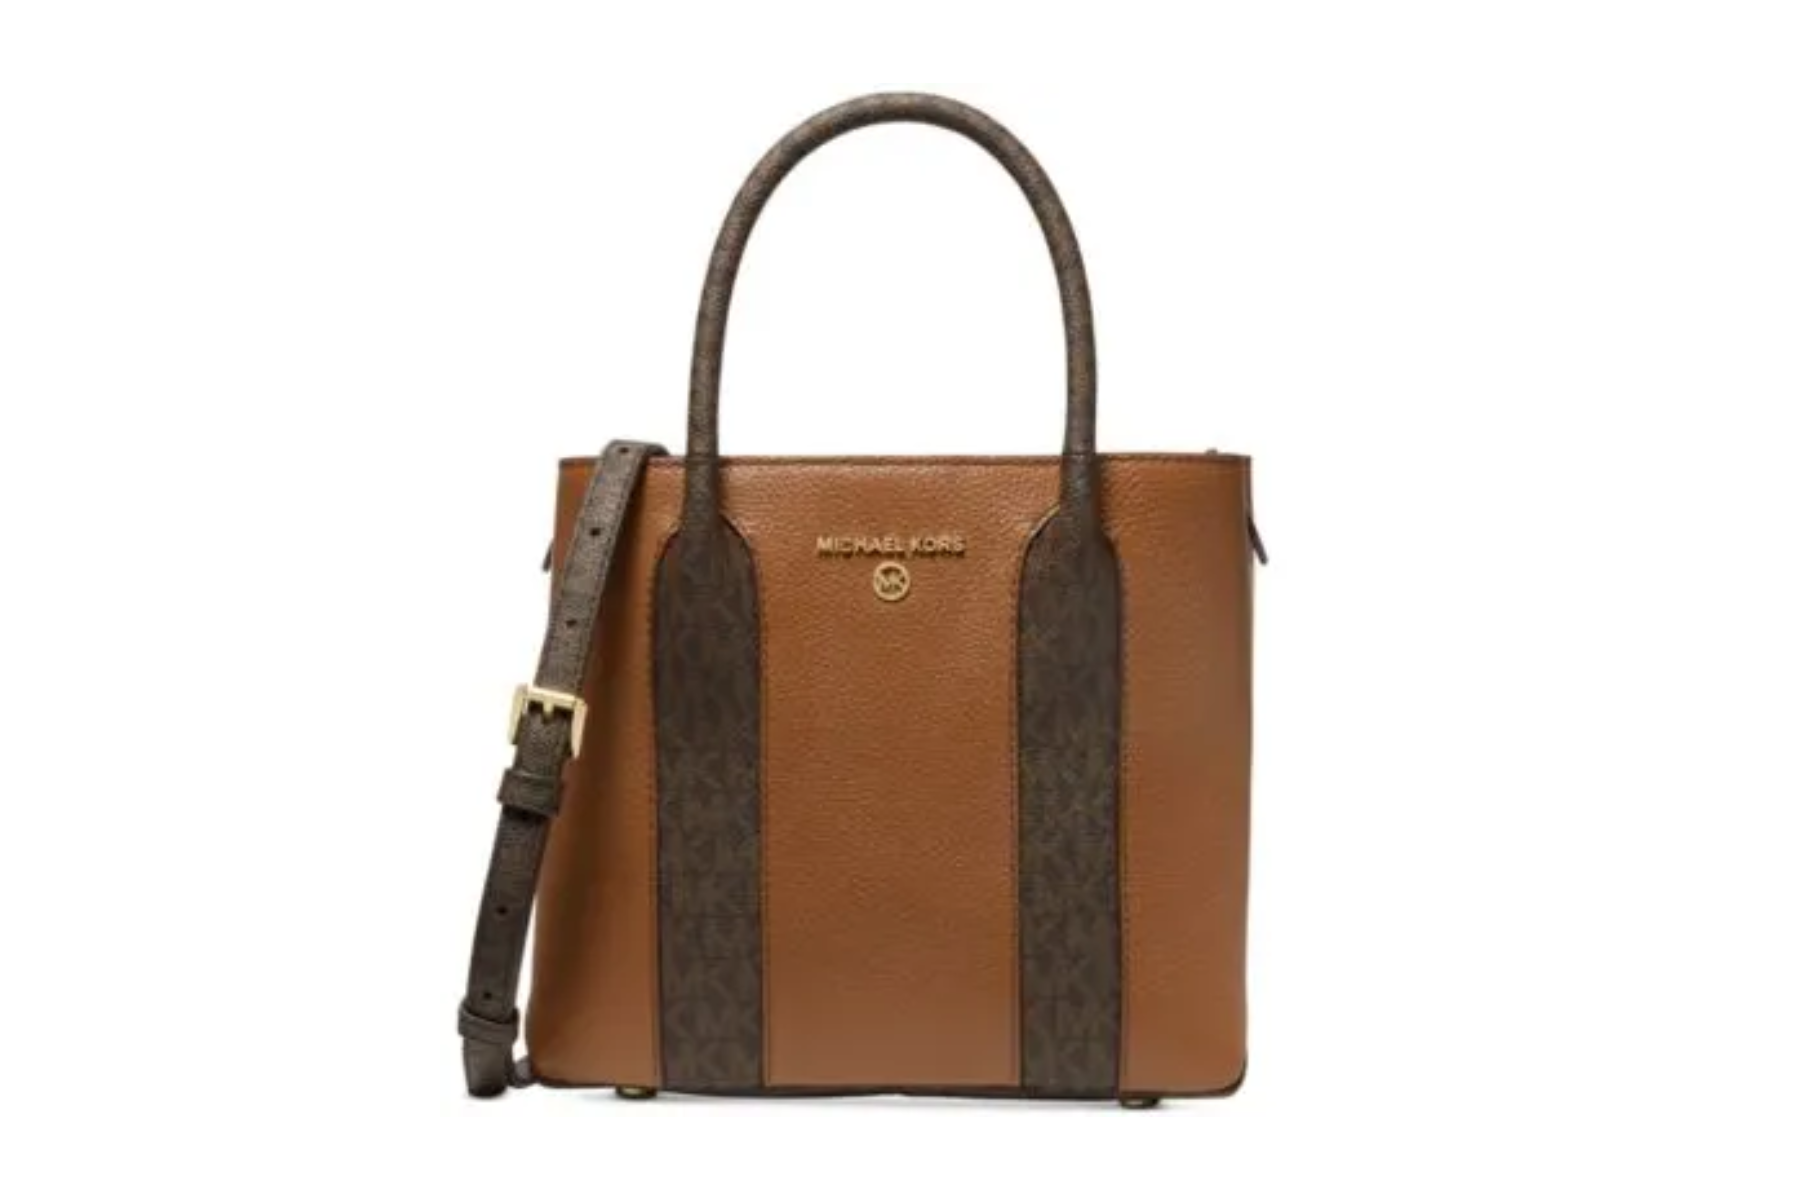 Leather bag with a logo of Michael Kors